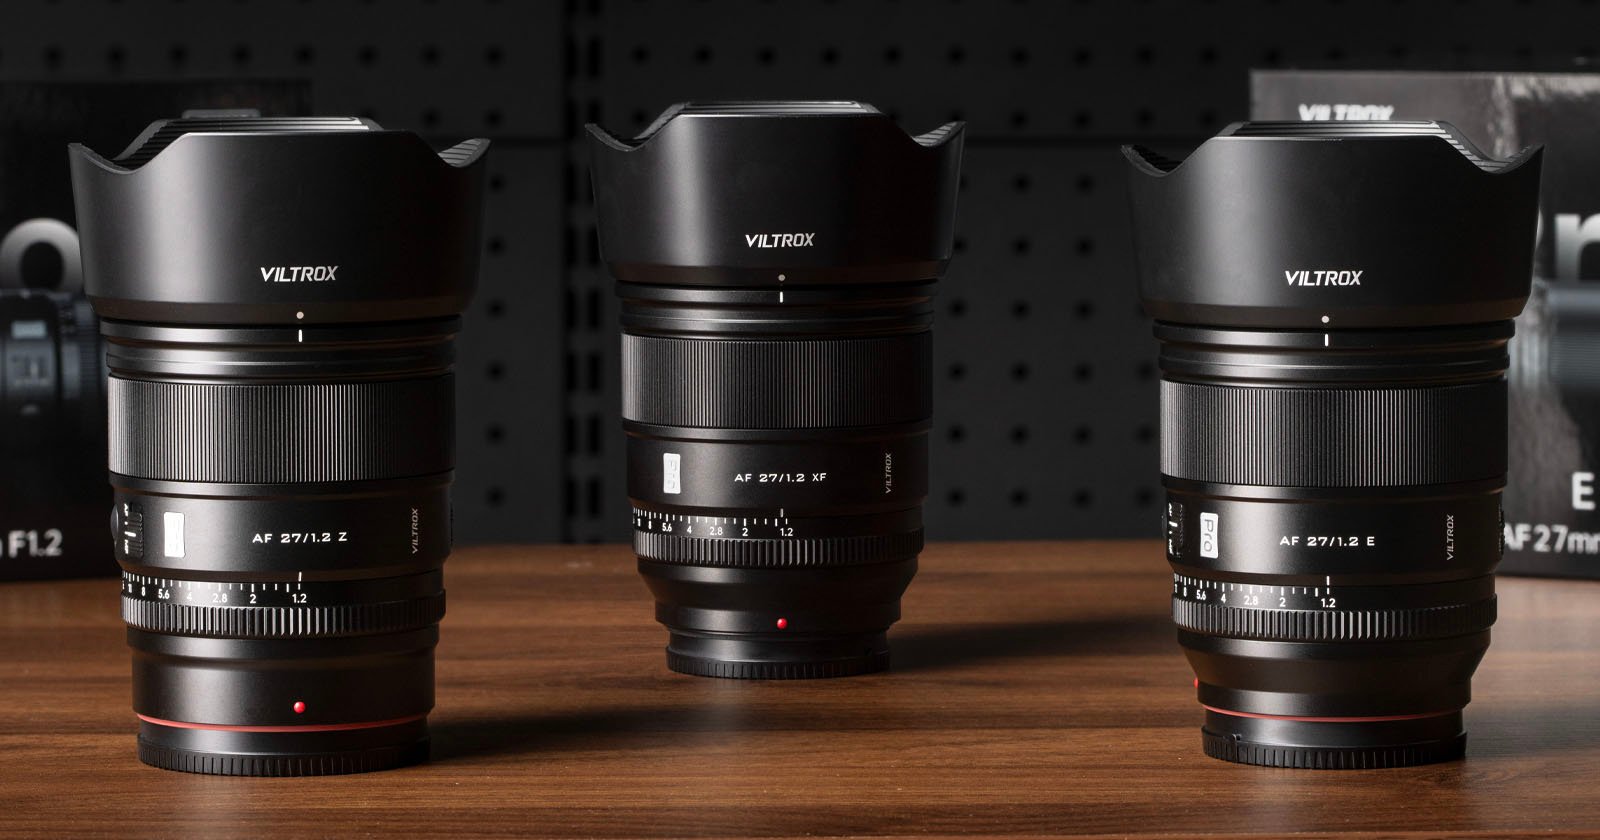 Viltroxs AF 27mm f/1.2 Pro Lens is Coming to Sony and Nikon APS-C